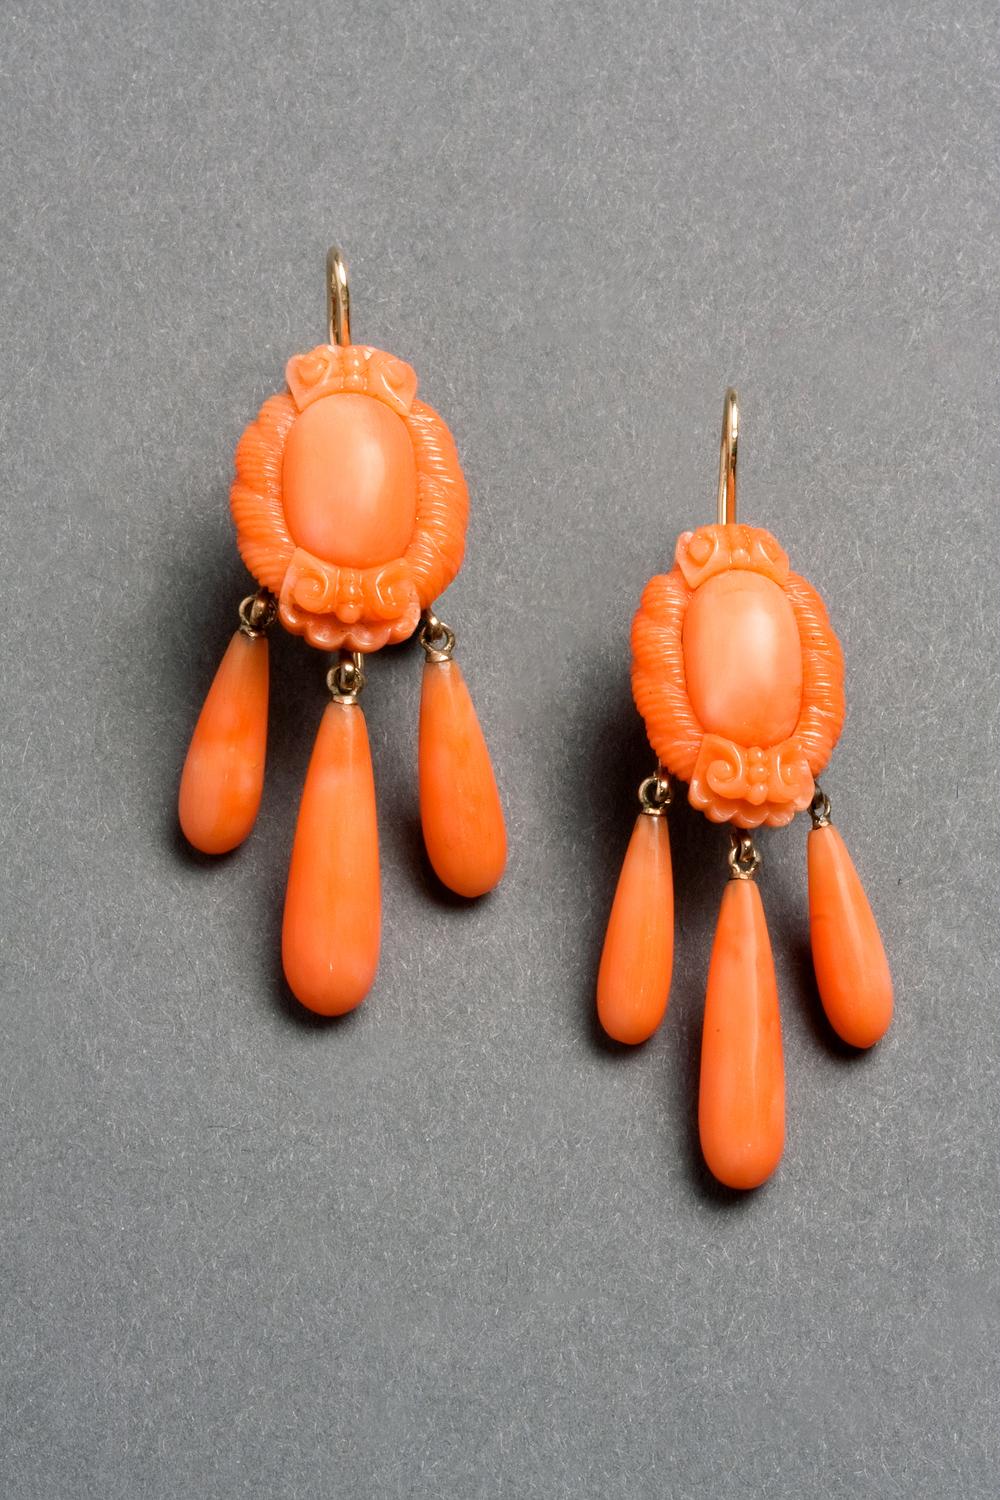 A delightful pair of coral ear pendants from the mid-Victorian era in wonderful original condition, each designed as a polished oval dome surrounded by carved floral motifs and twisted ropework borders in a pale orange-pink coral. Discreet rose gold